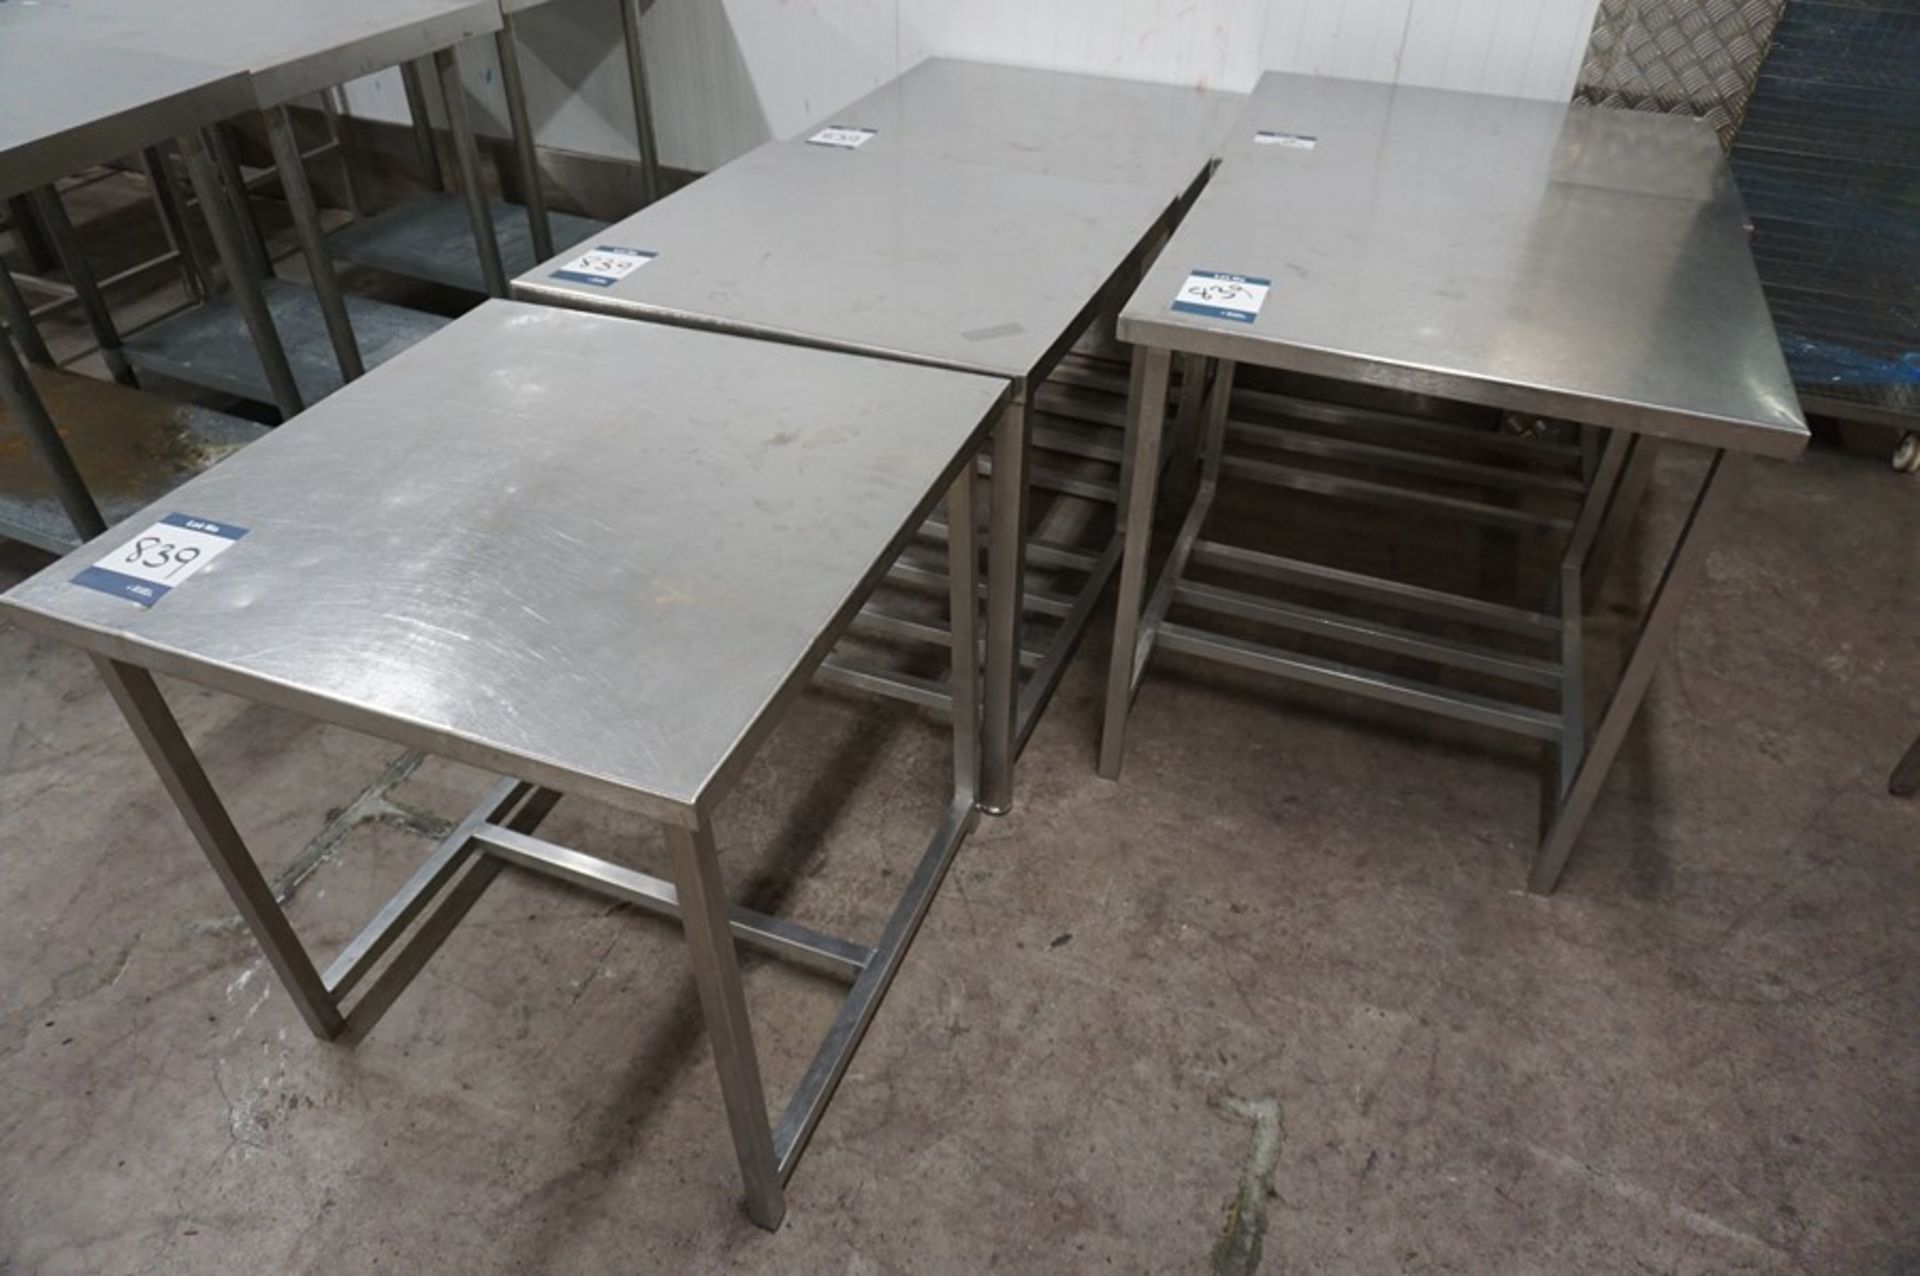 5 x Various stainless steel prep tables, as lotted